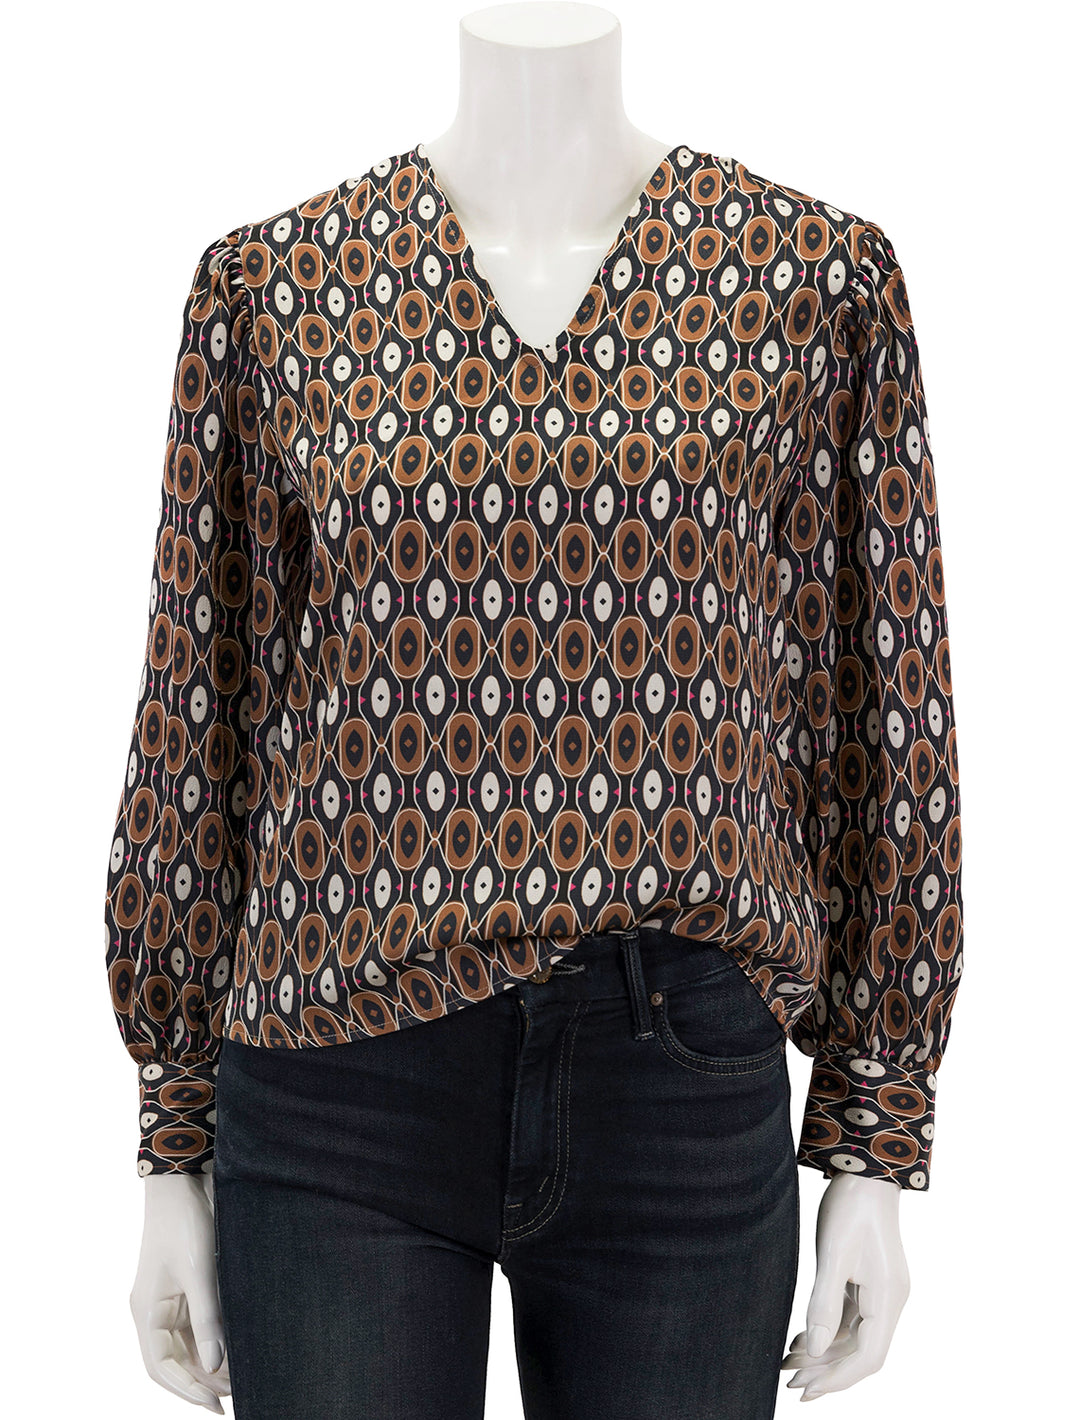 Front view of Vilagallo's camisa marlene geometric blouse.